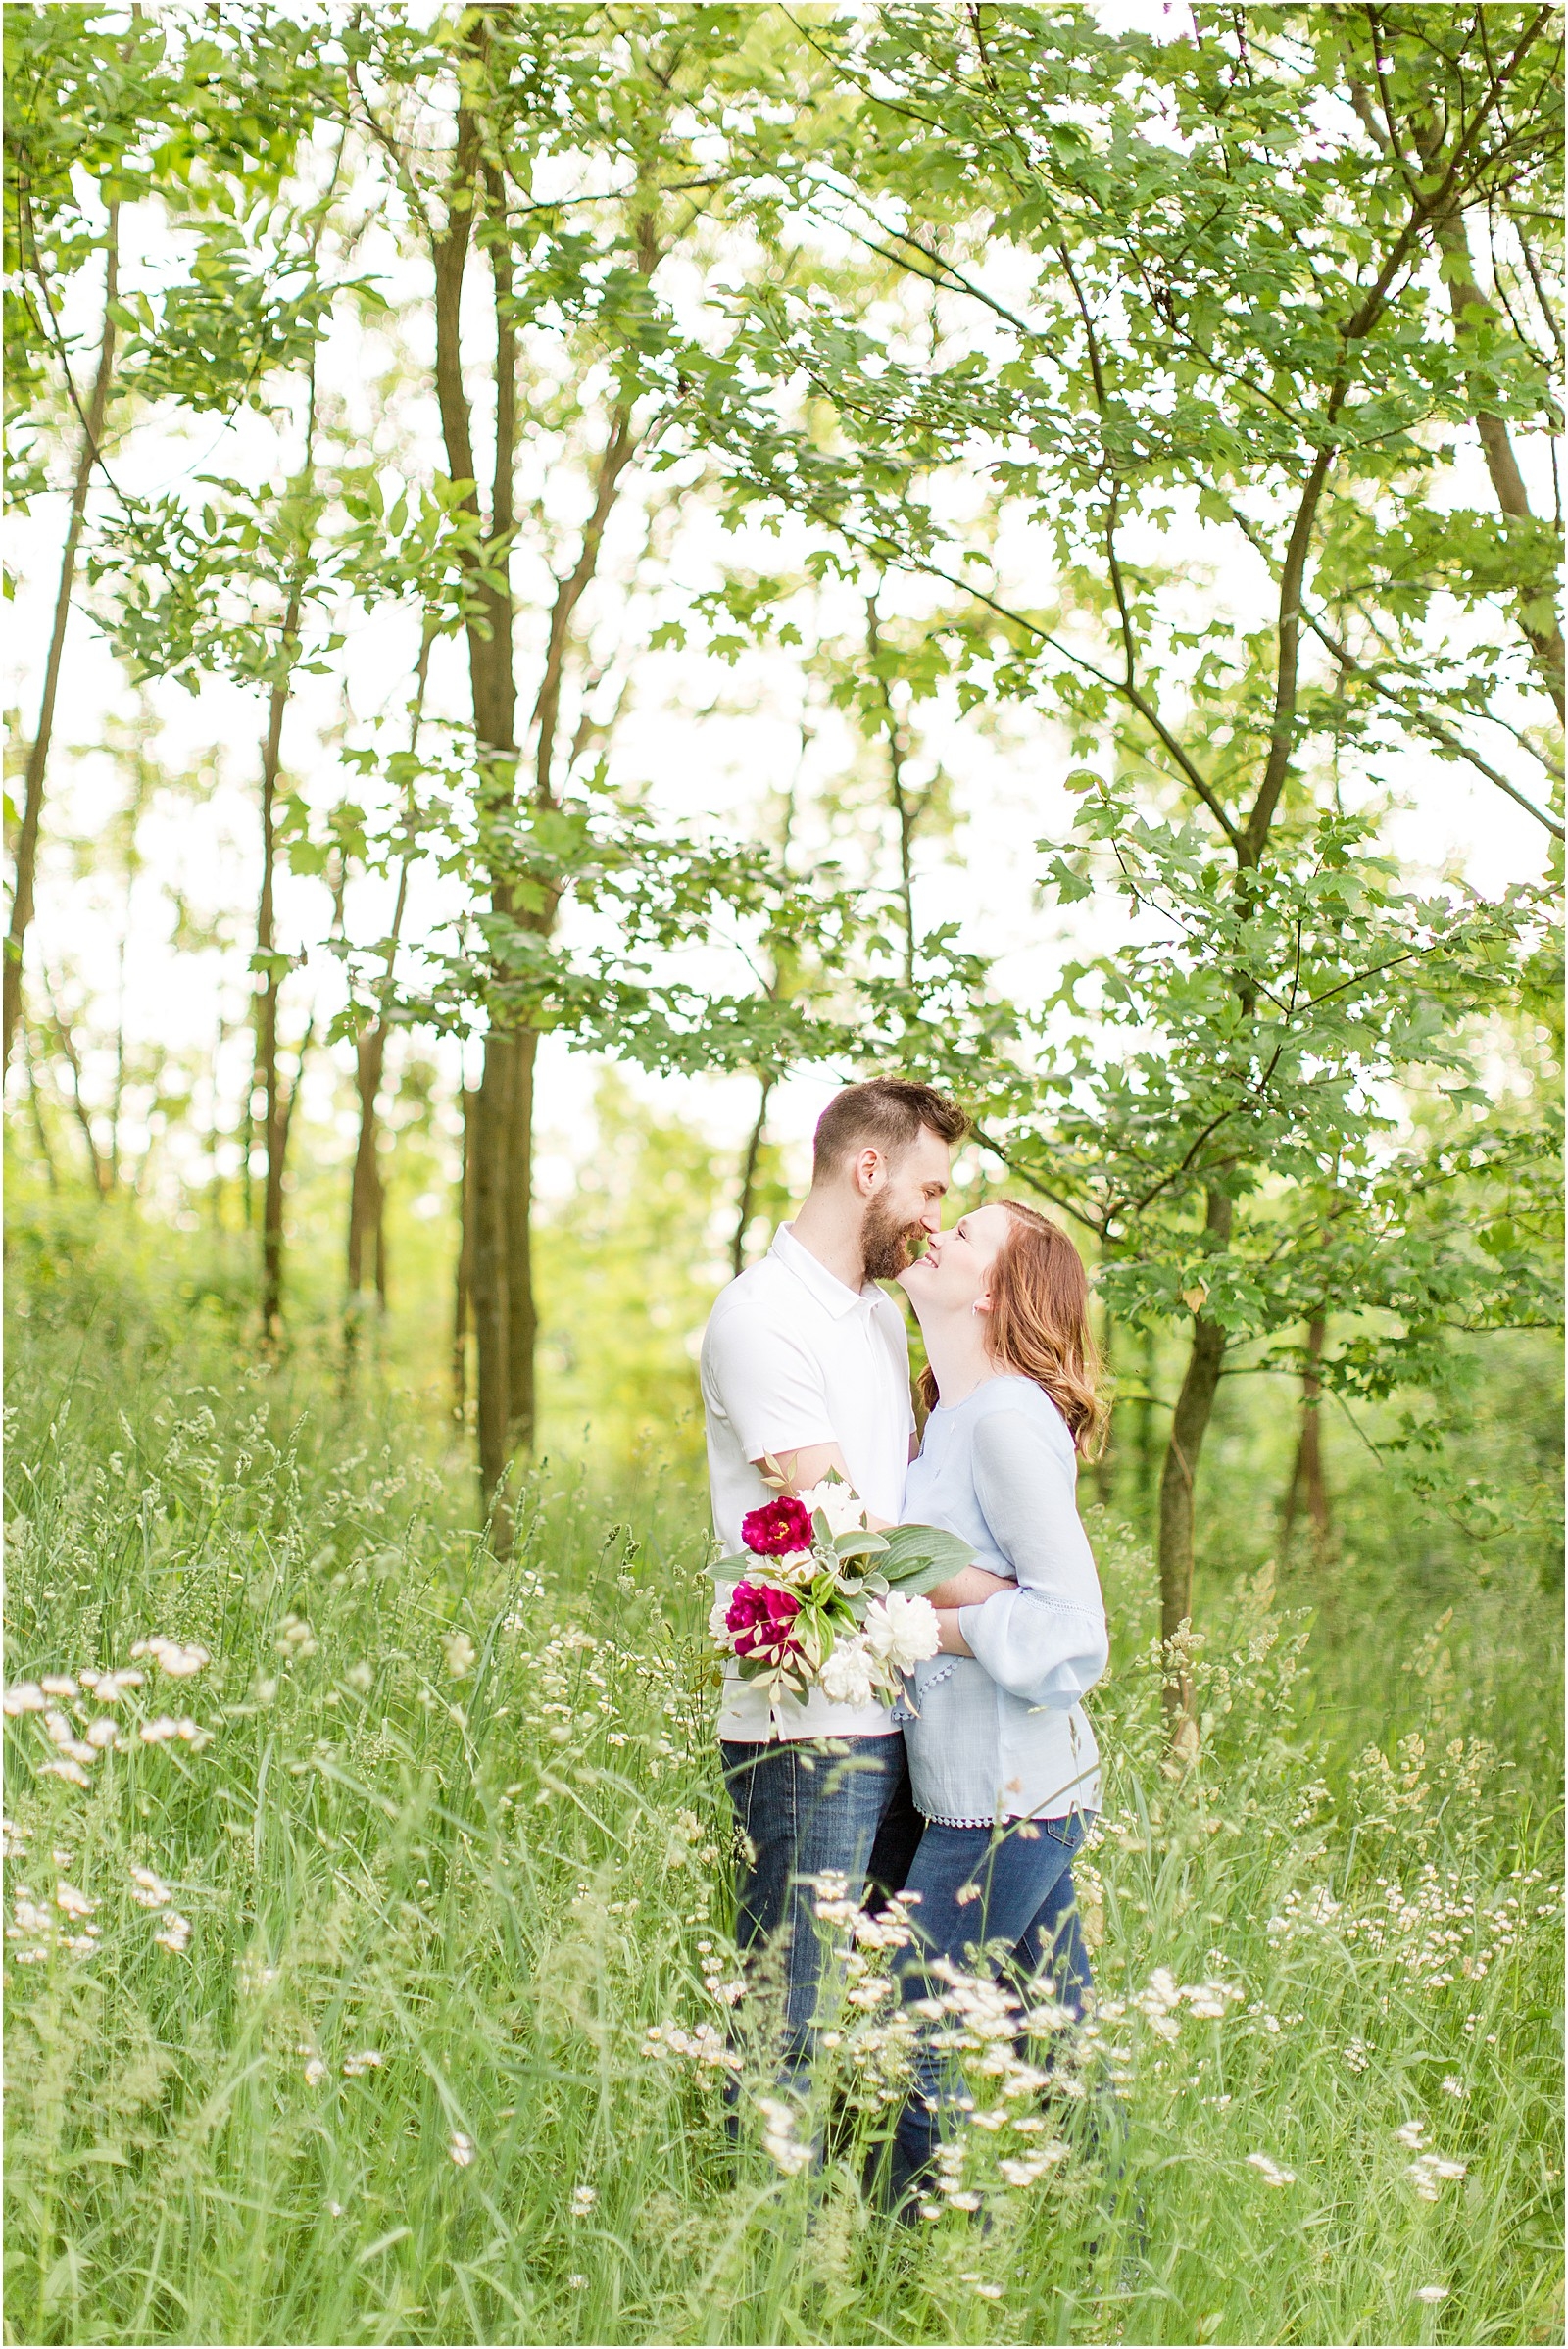 Amy and Logan | The Corner House Bed and Breakfast | Engagement Session011.jpg